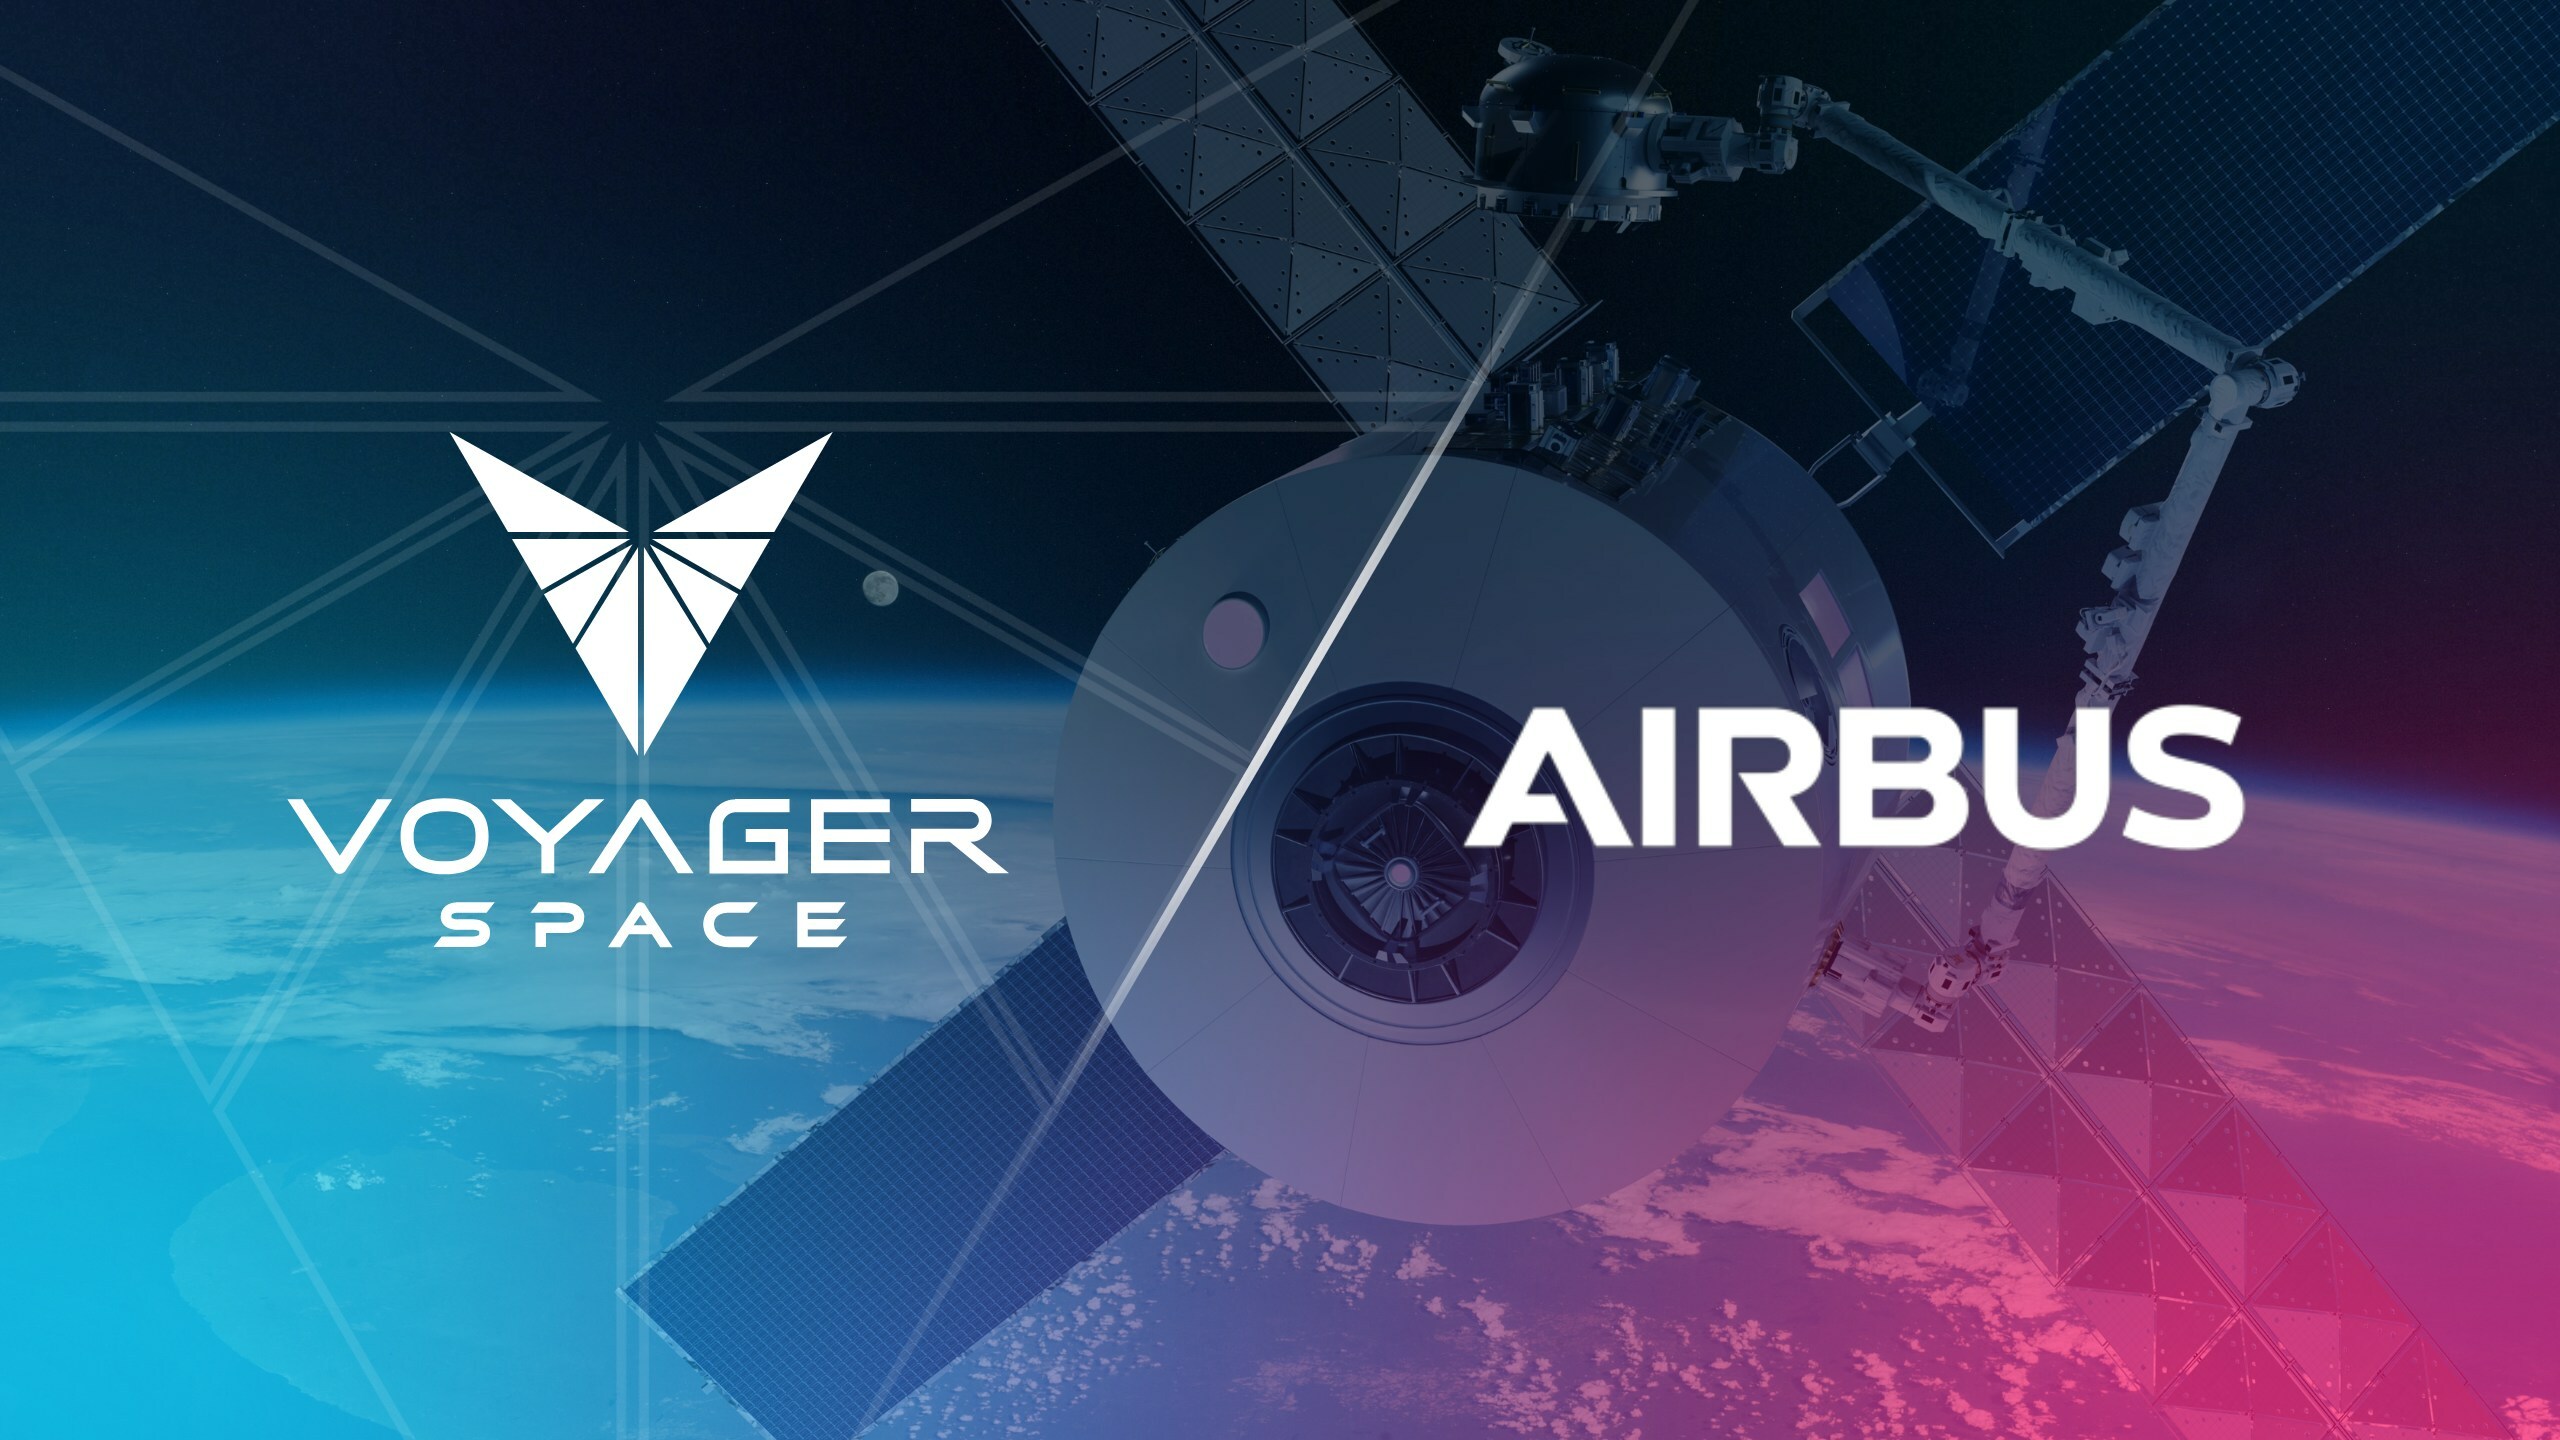 Voyager Space and Airbus Announce International Partnership for Future Starlab Space Station